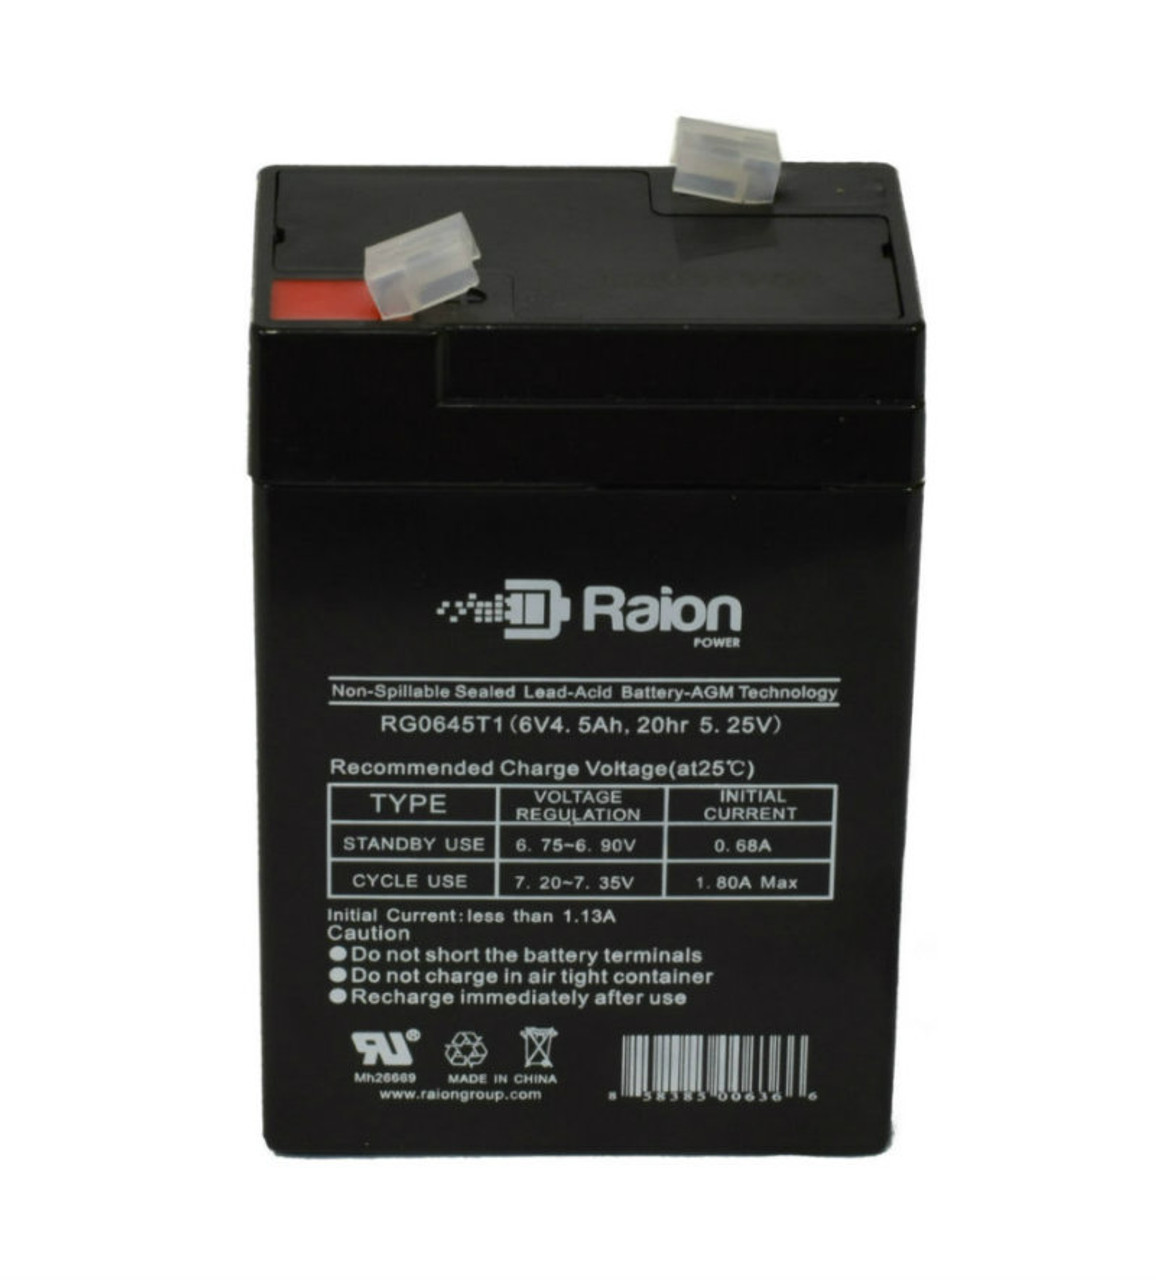 Raion Power RG0645T1 Replacement Battery Cartridge for Best Choice Products SKY4771 3-Wheel Motorcycle Ride-On Orange